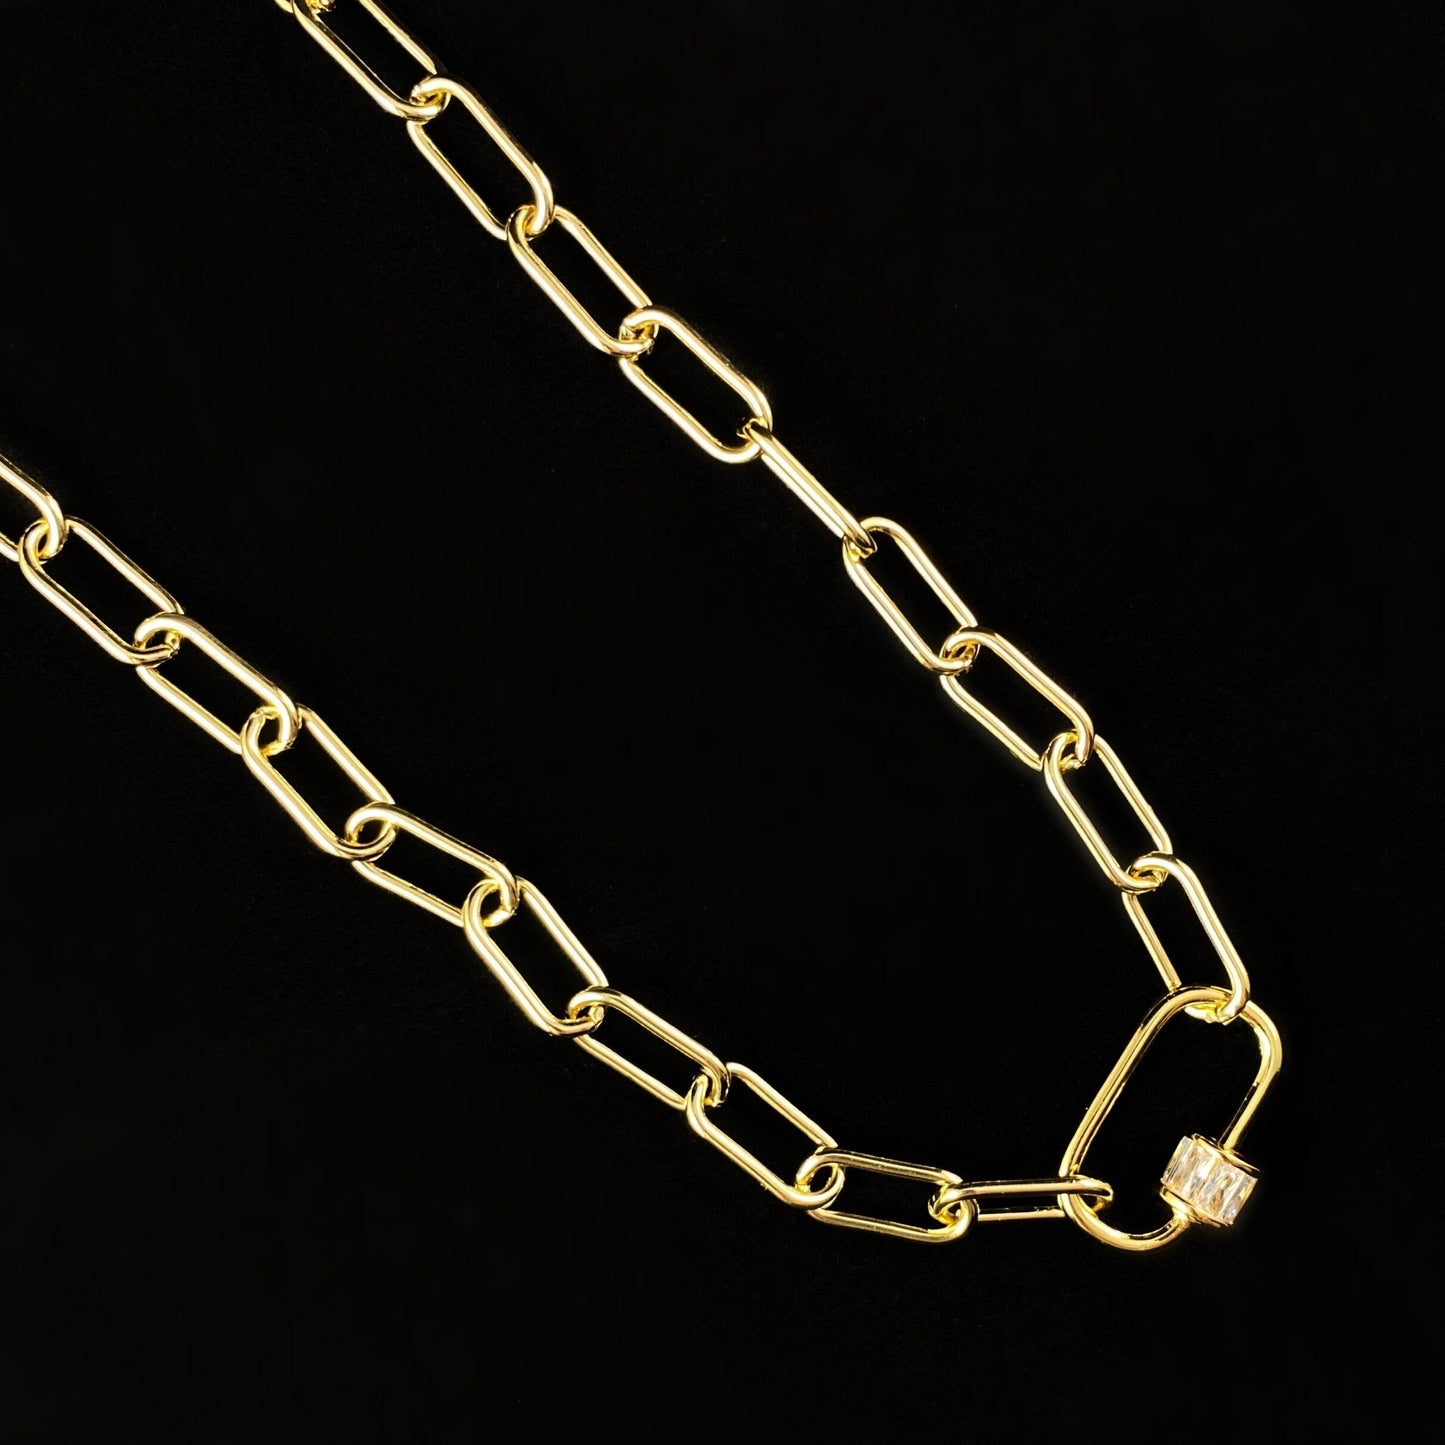 1920s Art Deco Gold Chain Necklace with CZ Crystal Focal Clasp - Locker Link